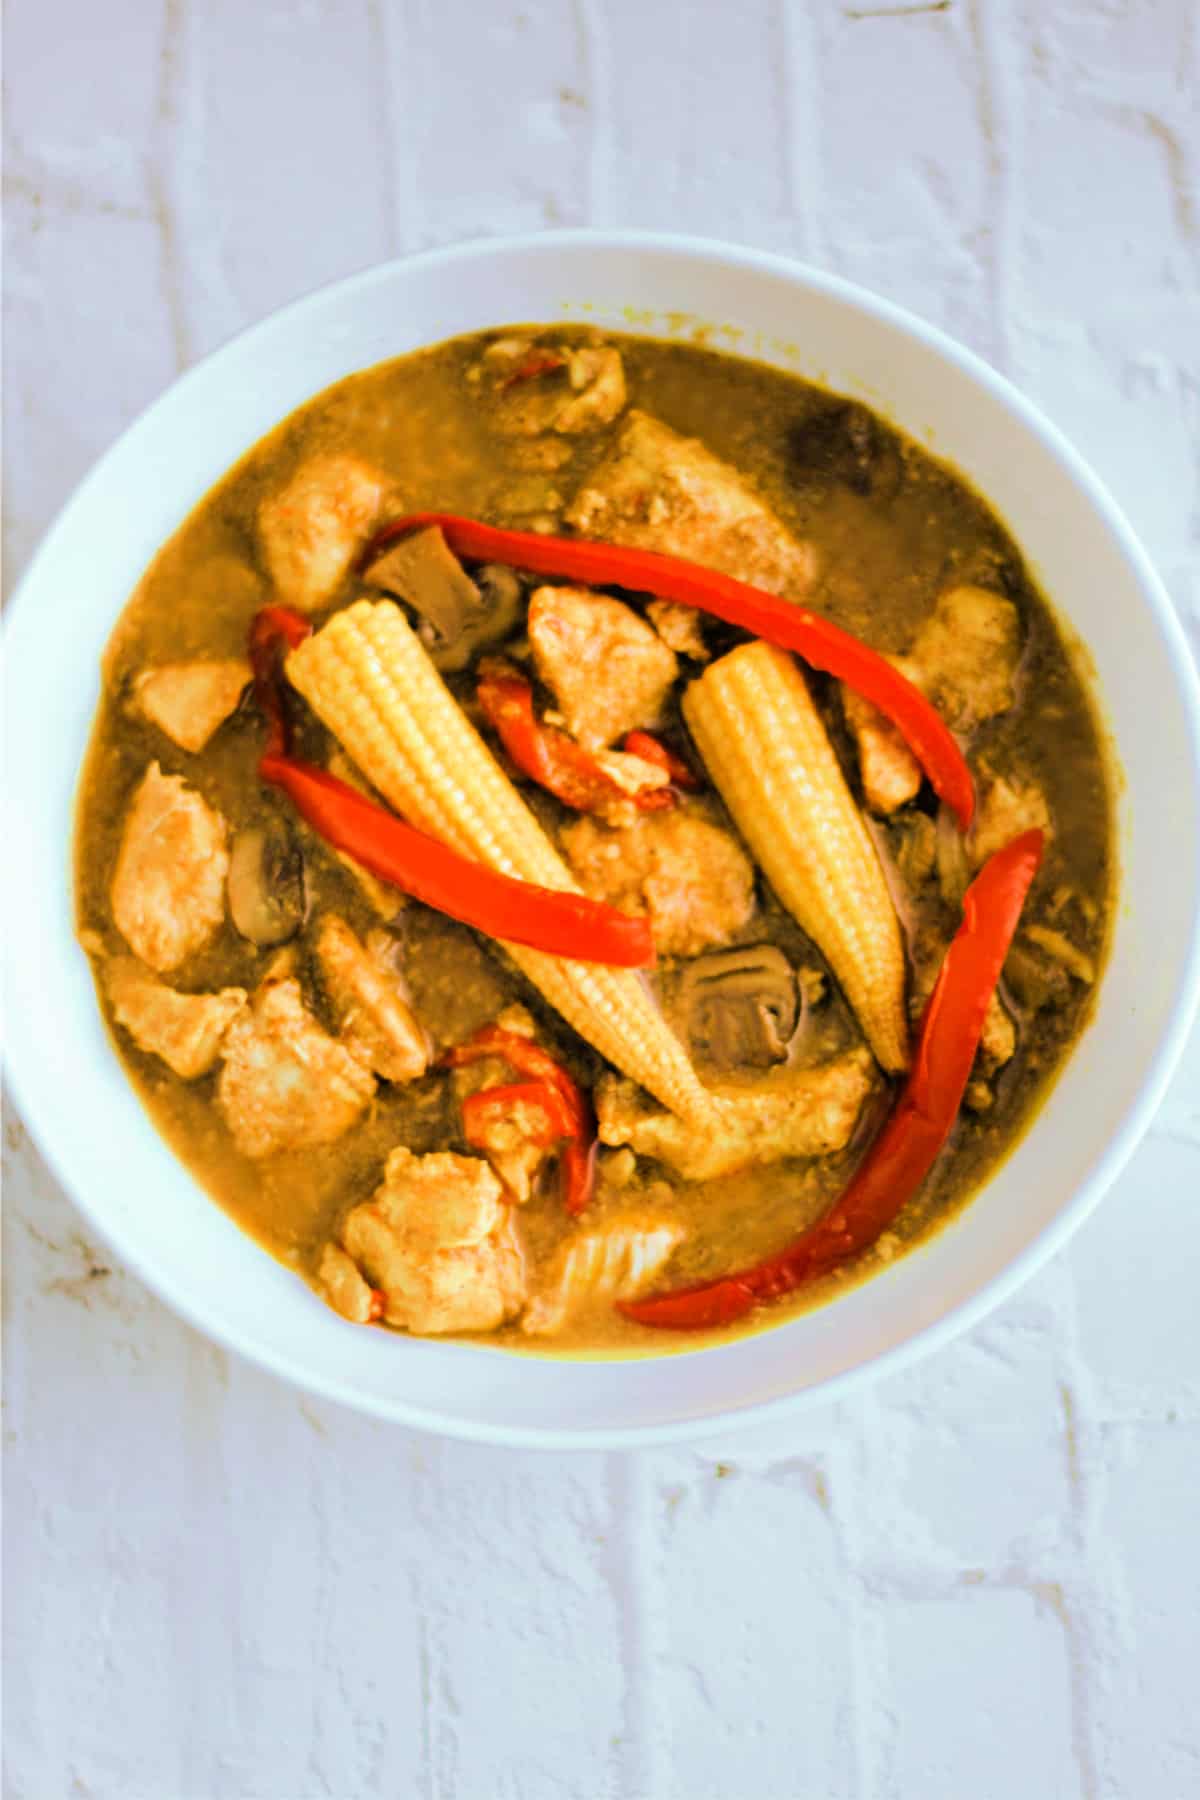 Overhead view of white bowl of Chinese curry with baby corn and red pepper, on white brick background.